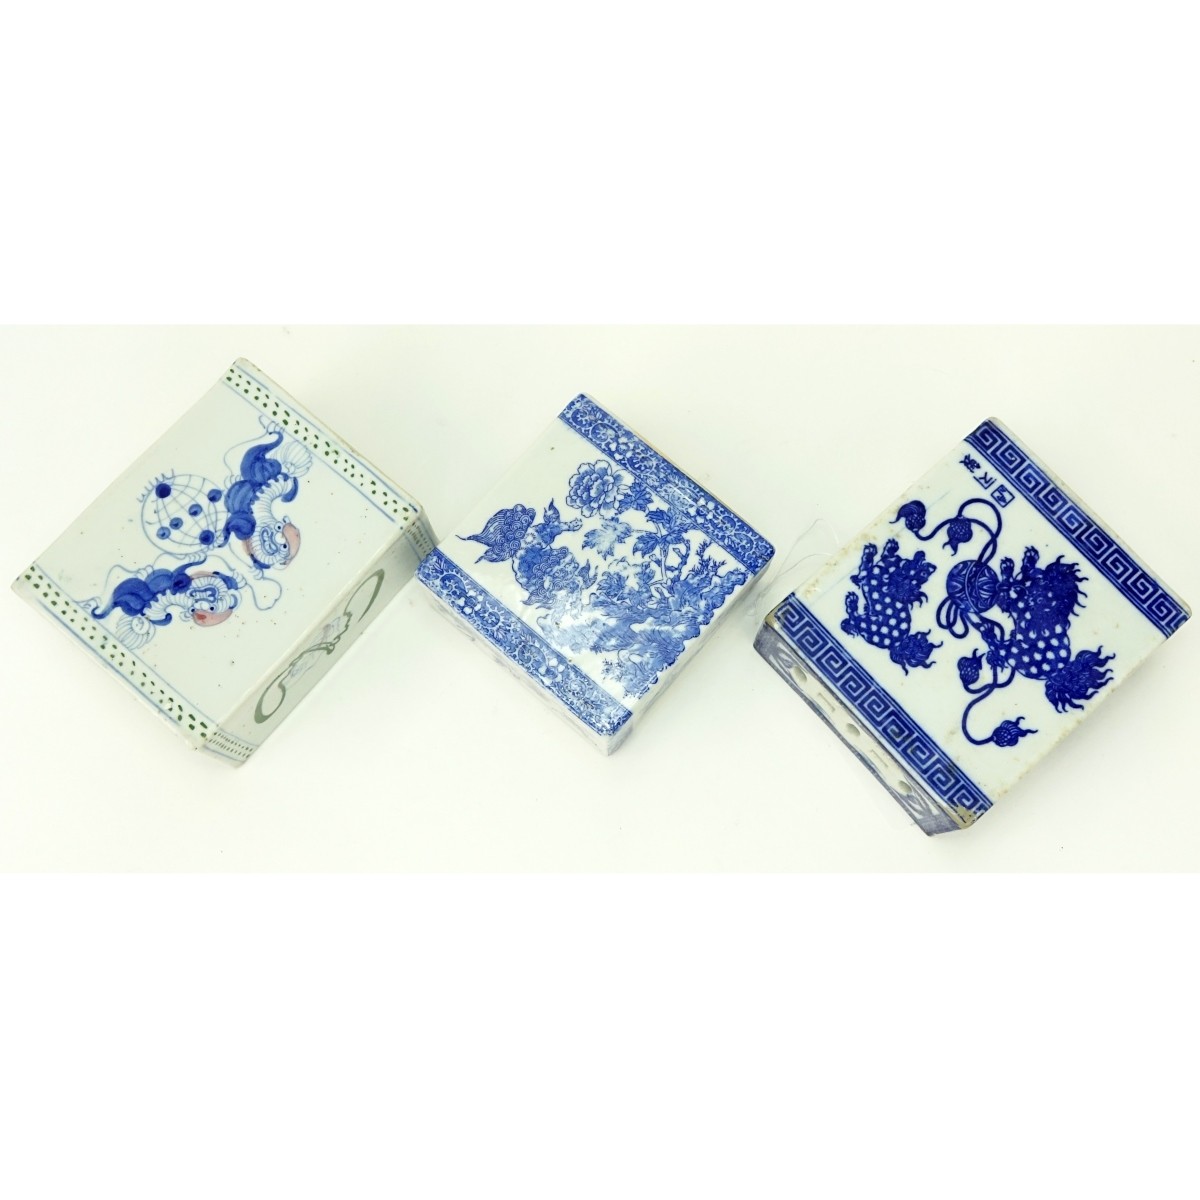 3 Chinese Blue & White Porcelain Opium Pillows